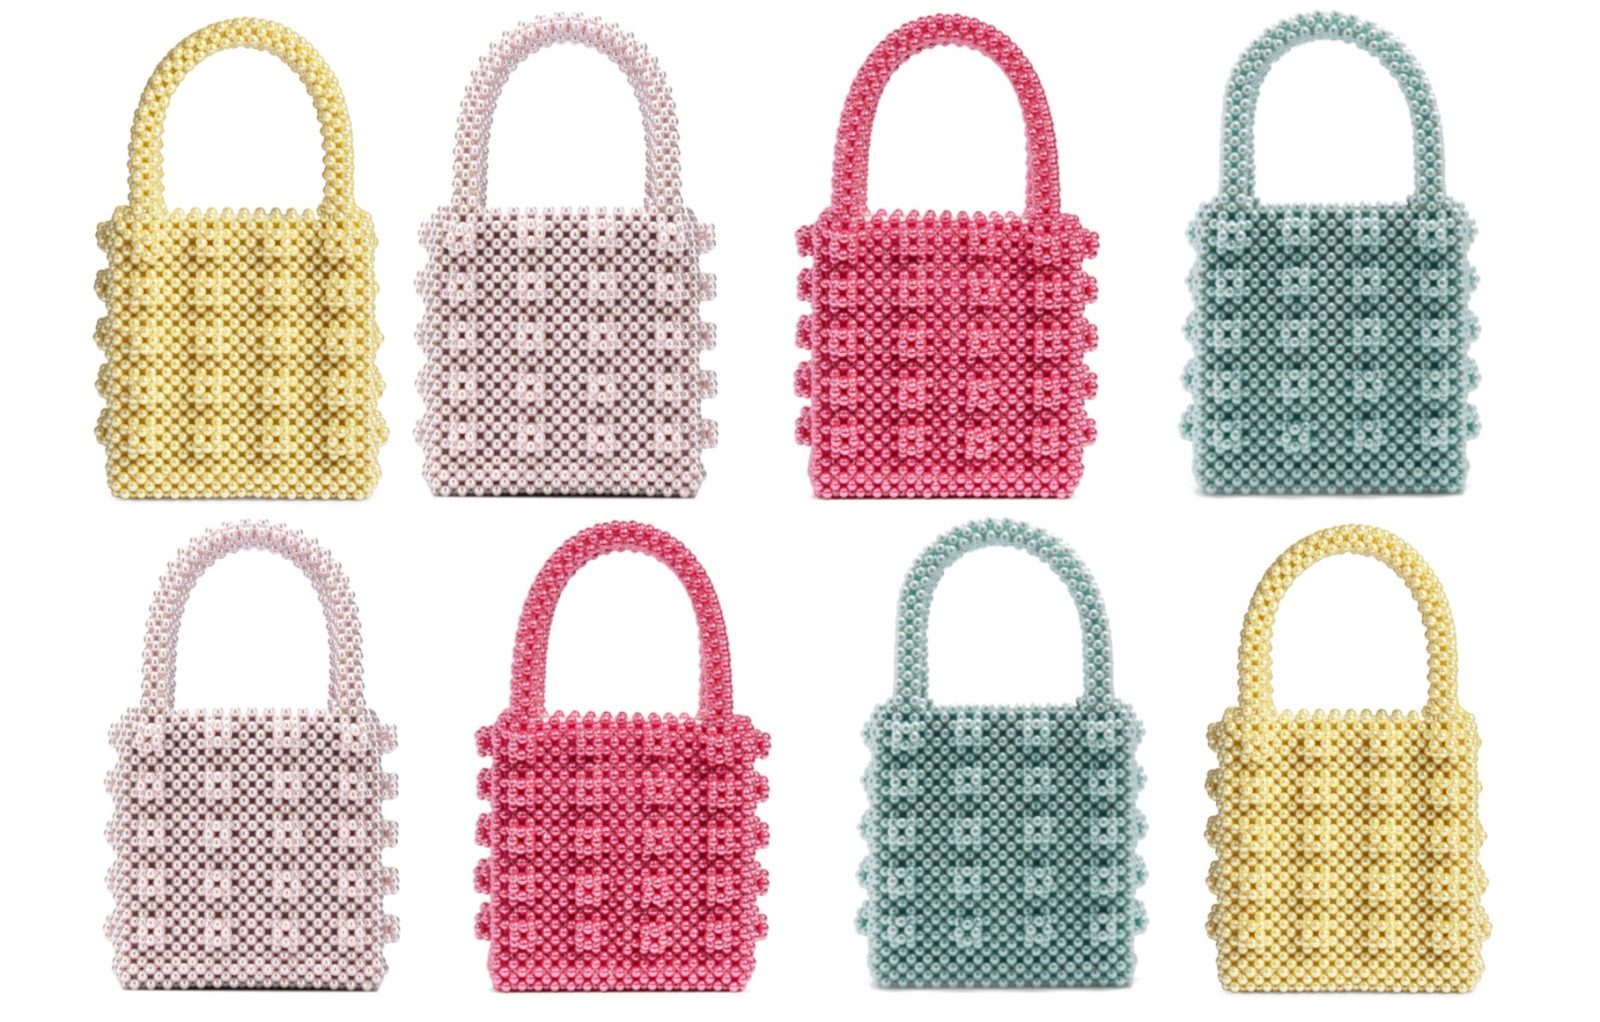 Louis Vuitton Granted A Design Patent for This Luggage Tote Bag — Fashion,  Law & Business